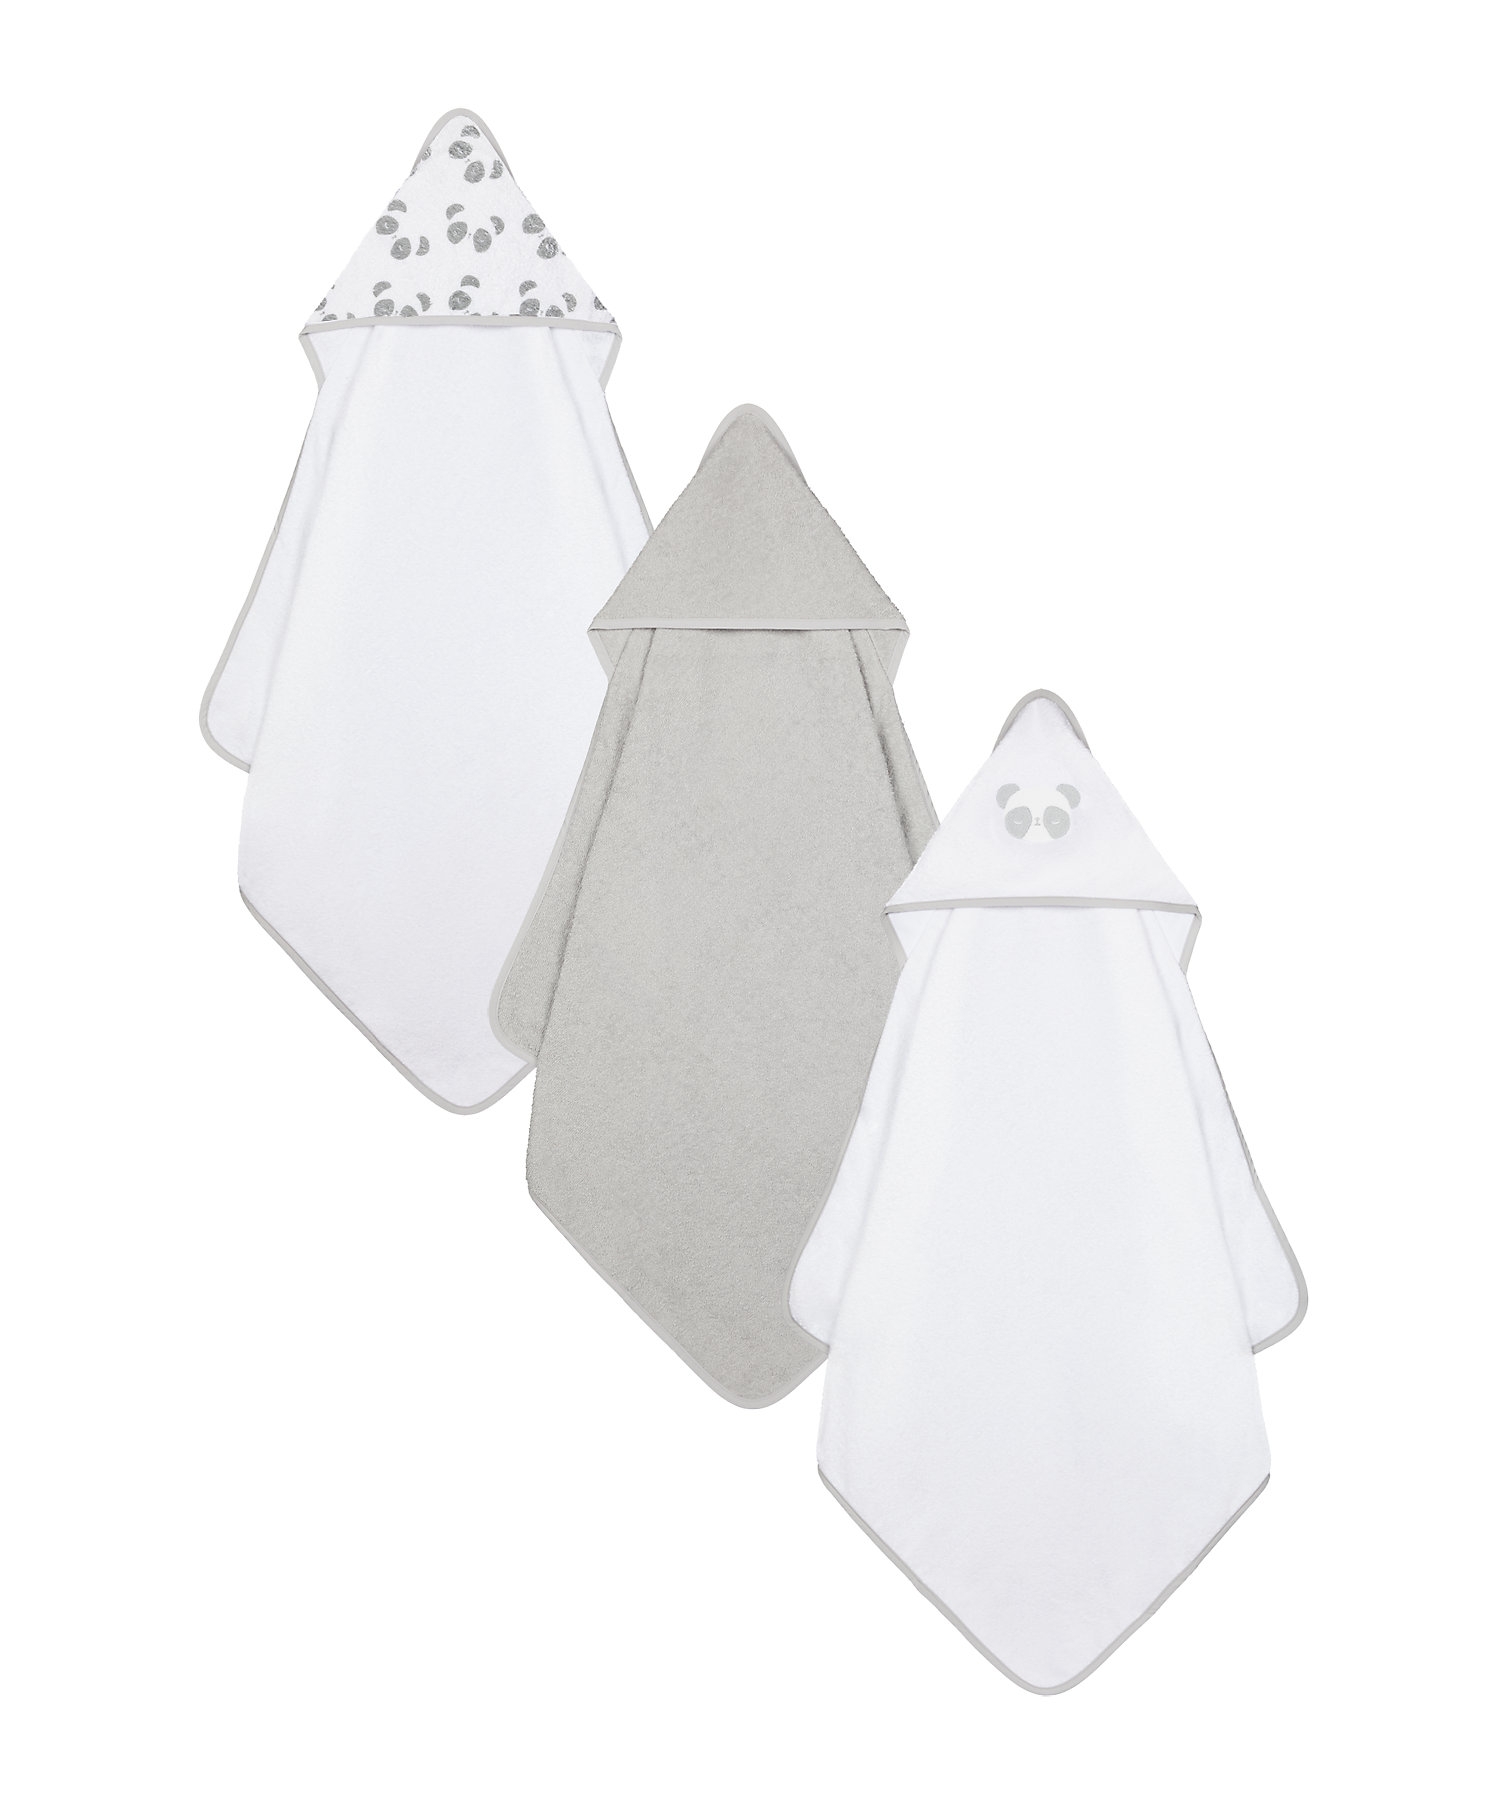 Mothercare | Mothercare 3 pack Cuddle and Dry Baby Towels Grey